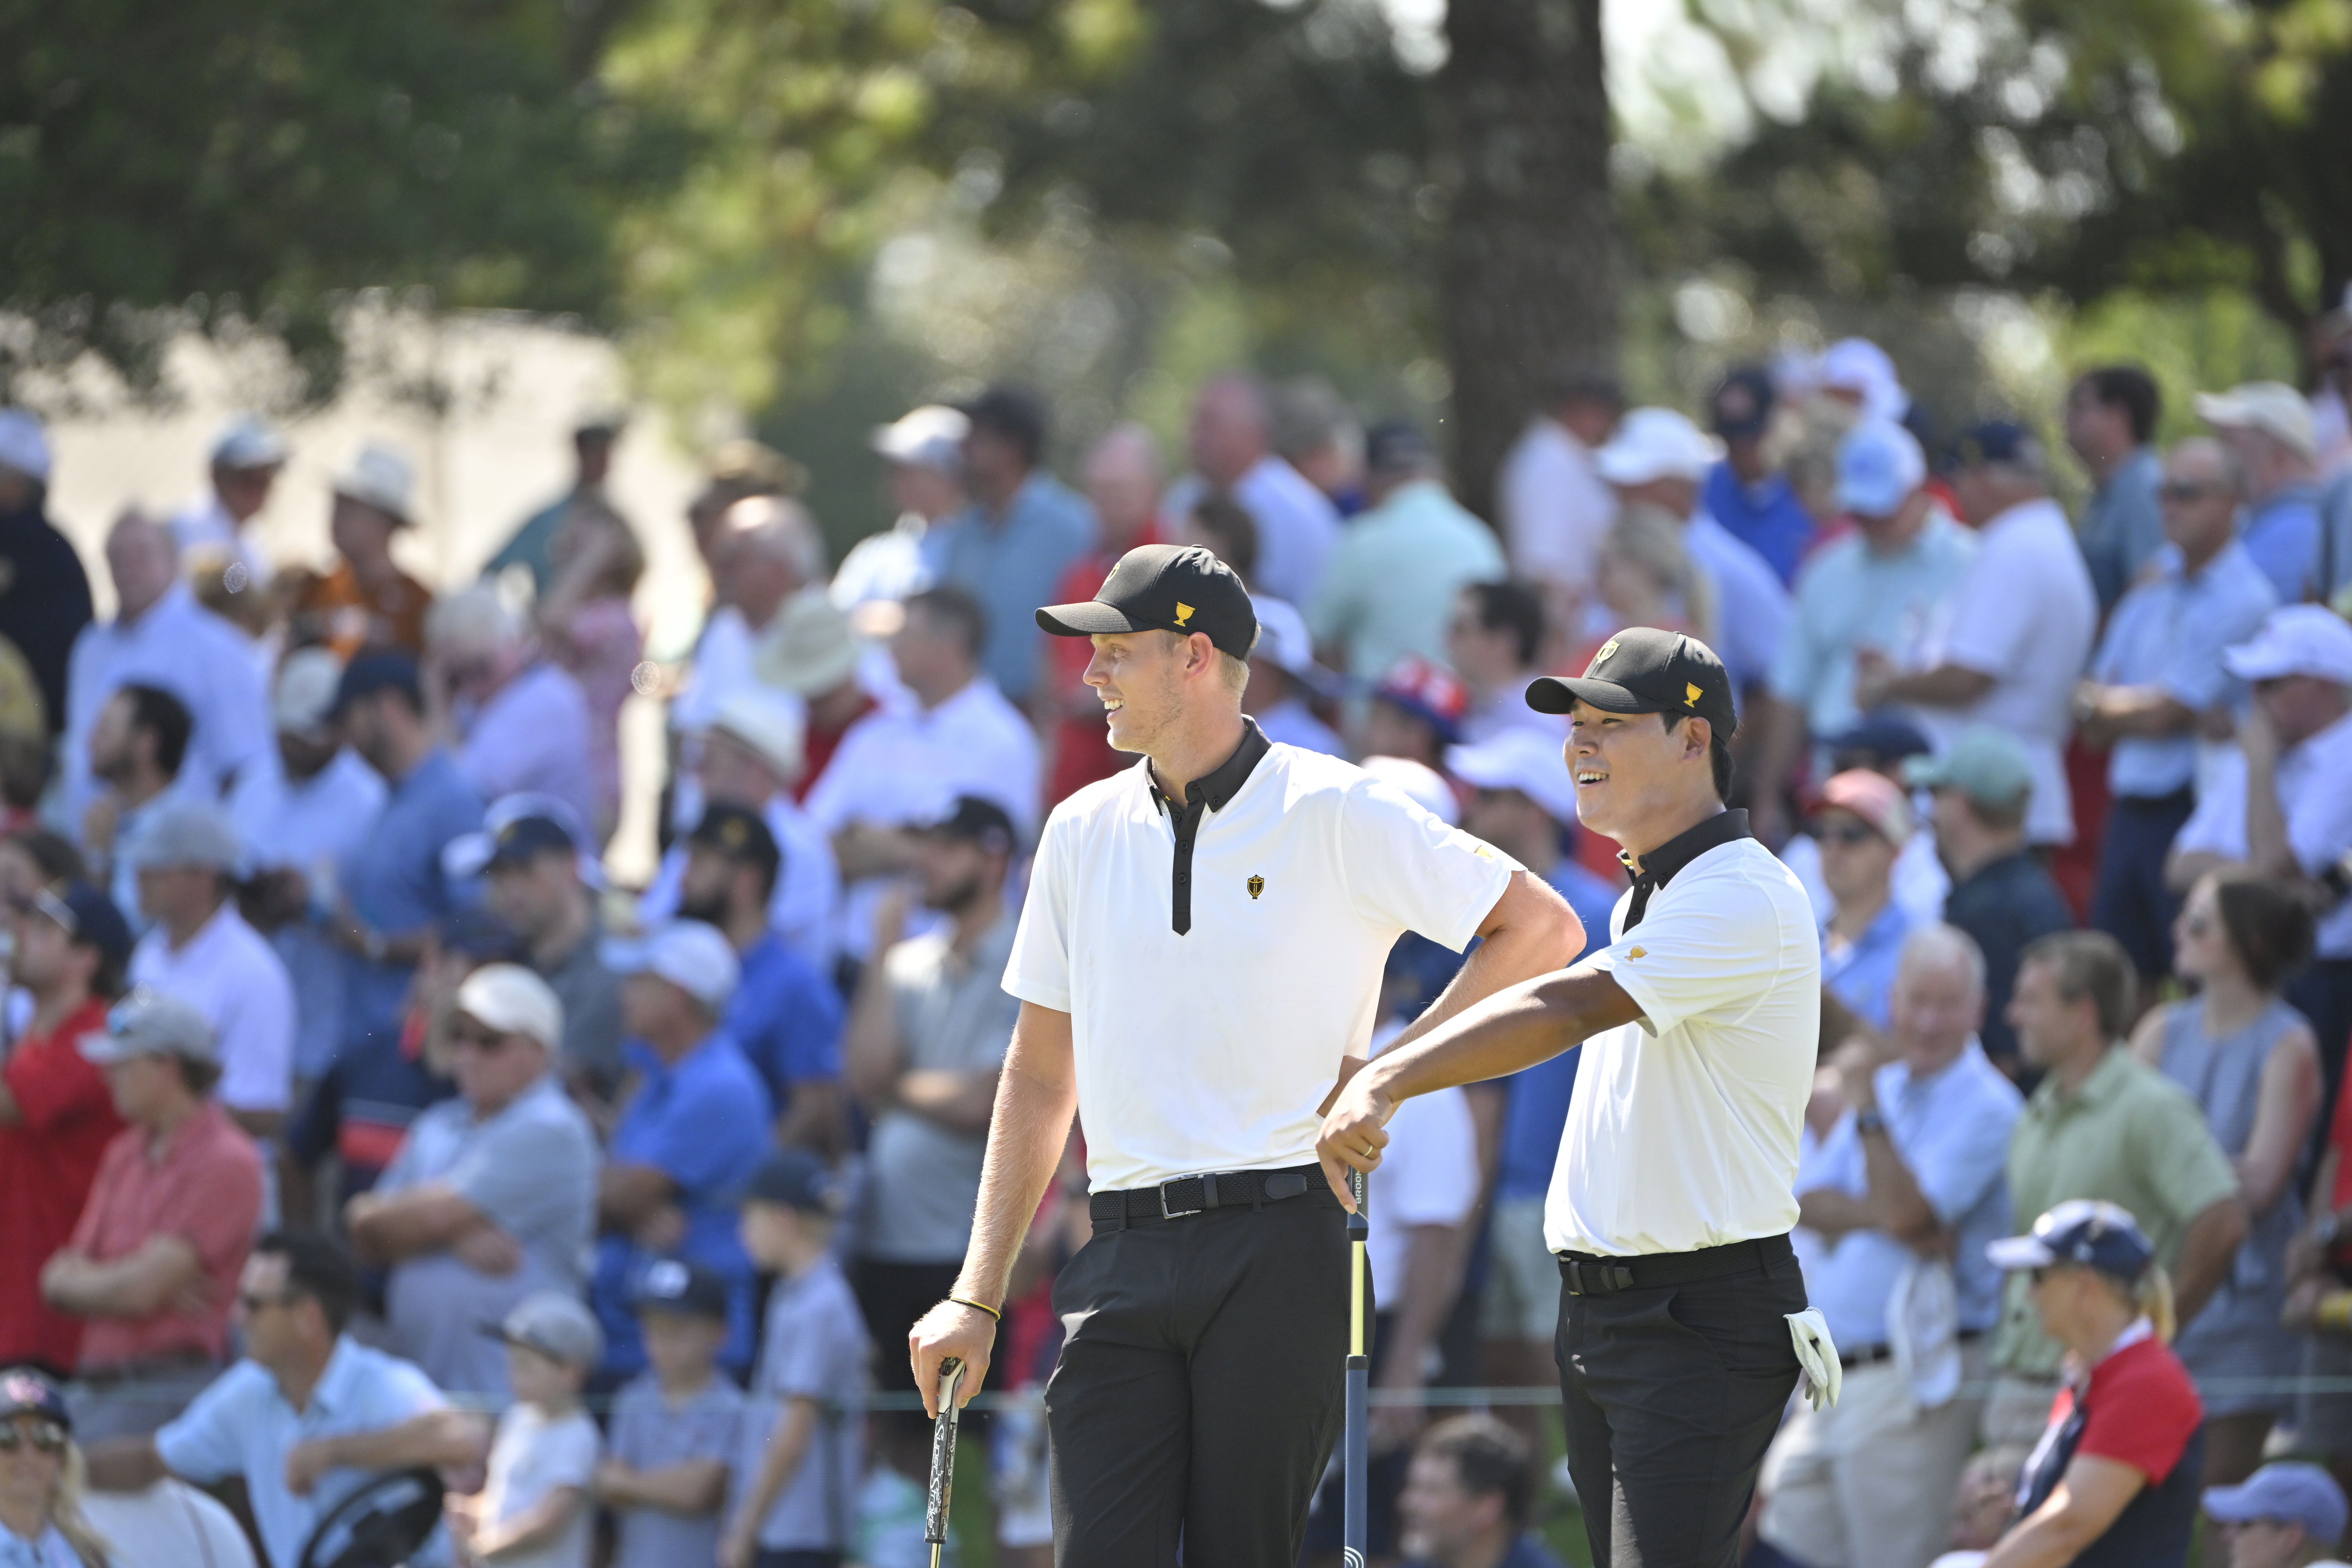 International Team members Si Woo Kim of South Korea and Cam Davis of Australia are seen on the second green  during the first round of Presidents Cup at Quail Hollow September 22, 2022, in Charlotte, North Carolina. (Photo by Ben Jared/PGA TOUR via Getty Images)